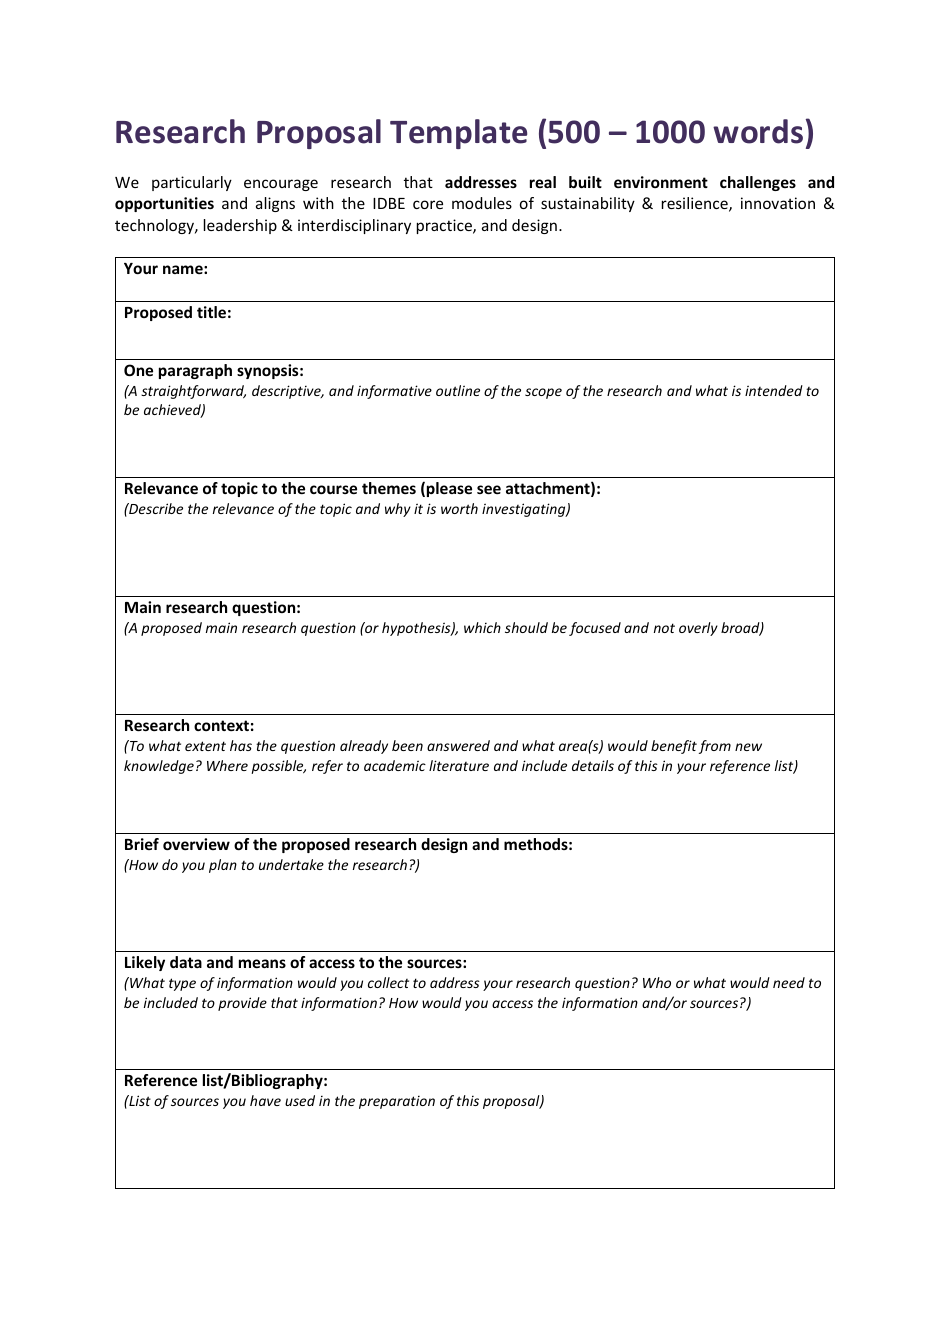 Research Proposal Template Preview